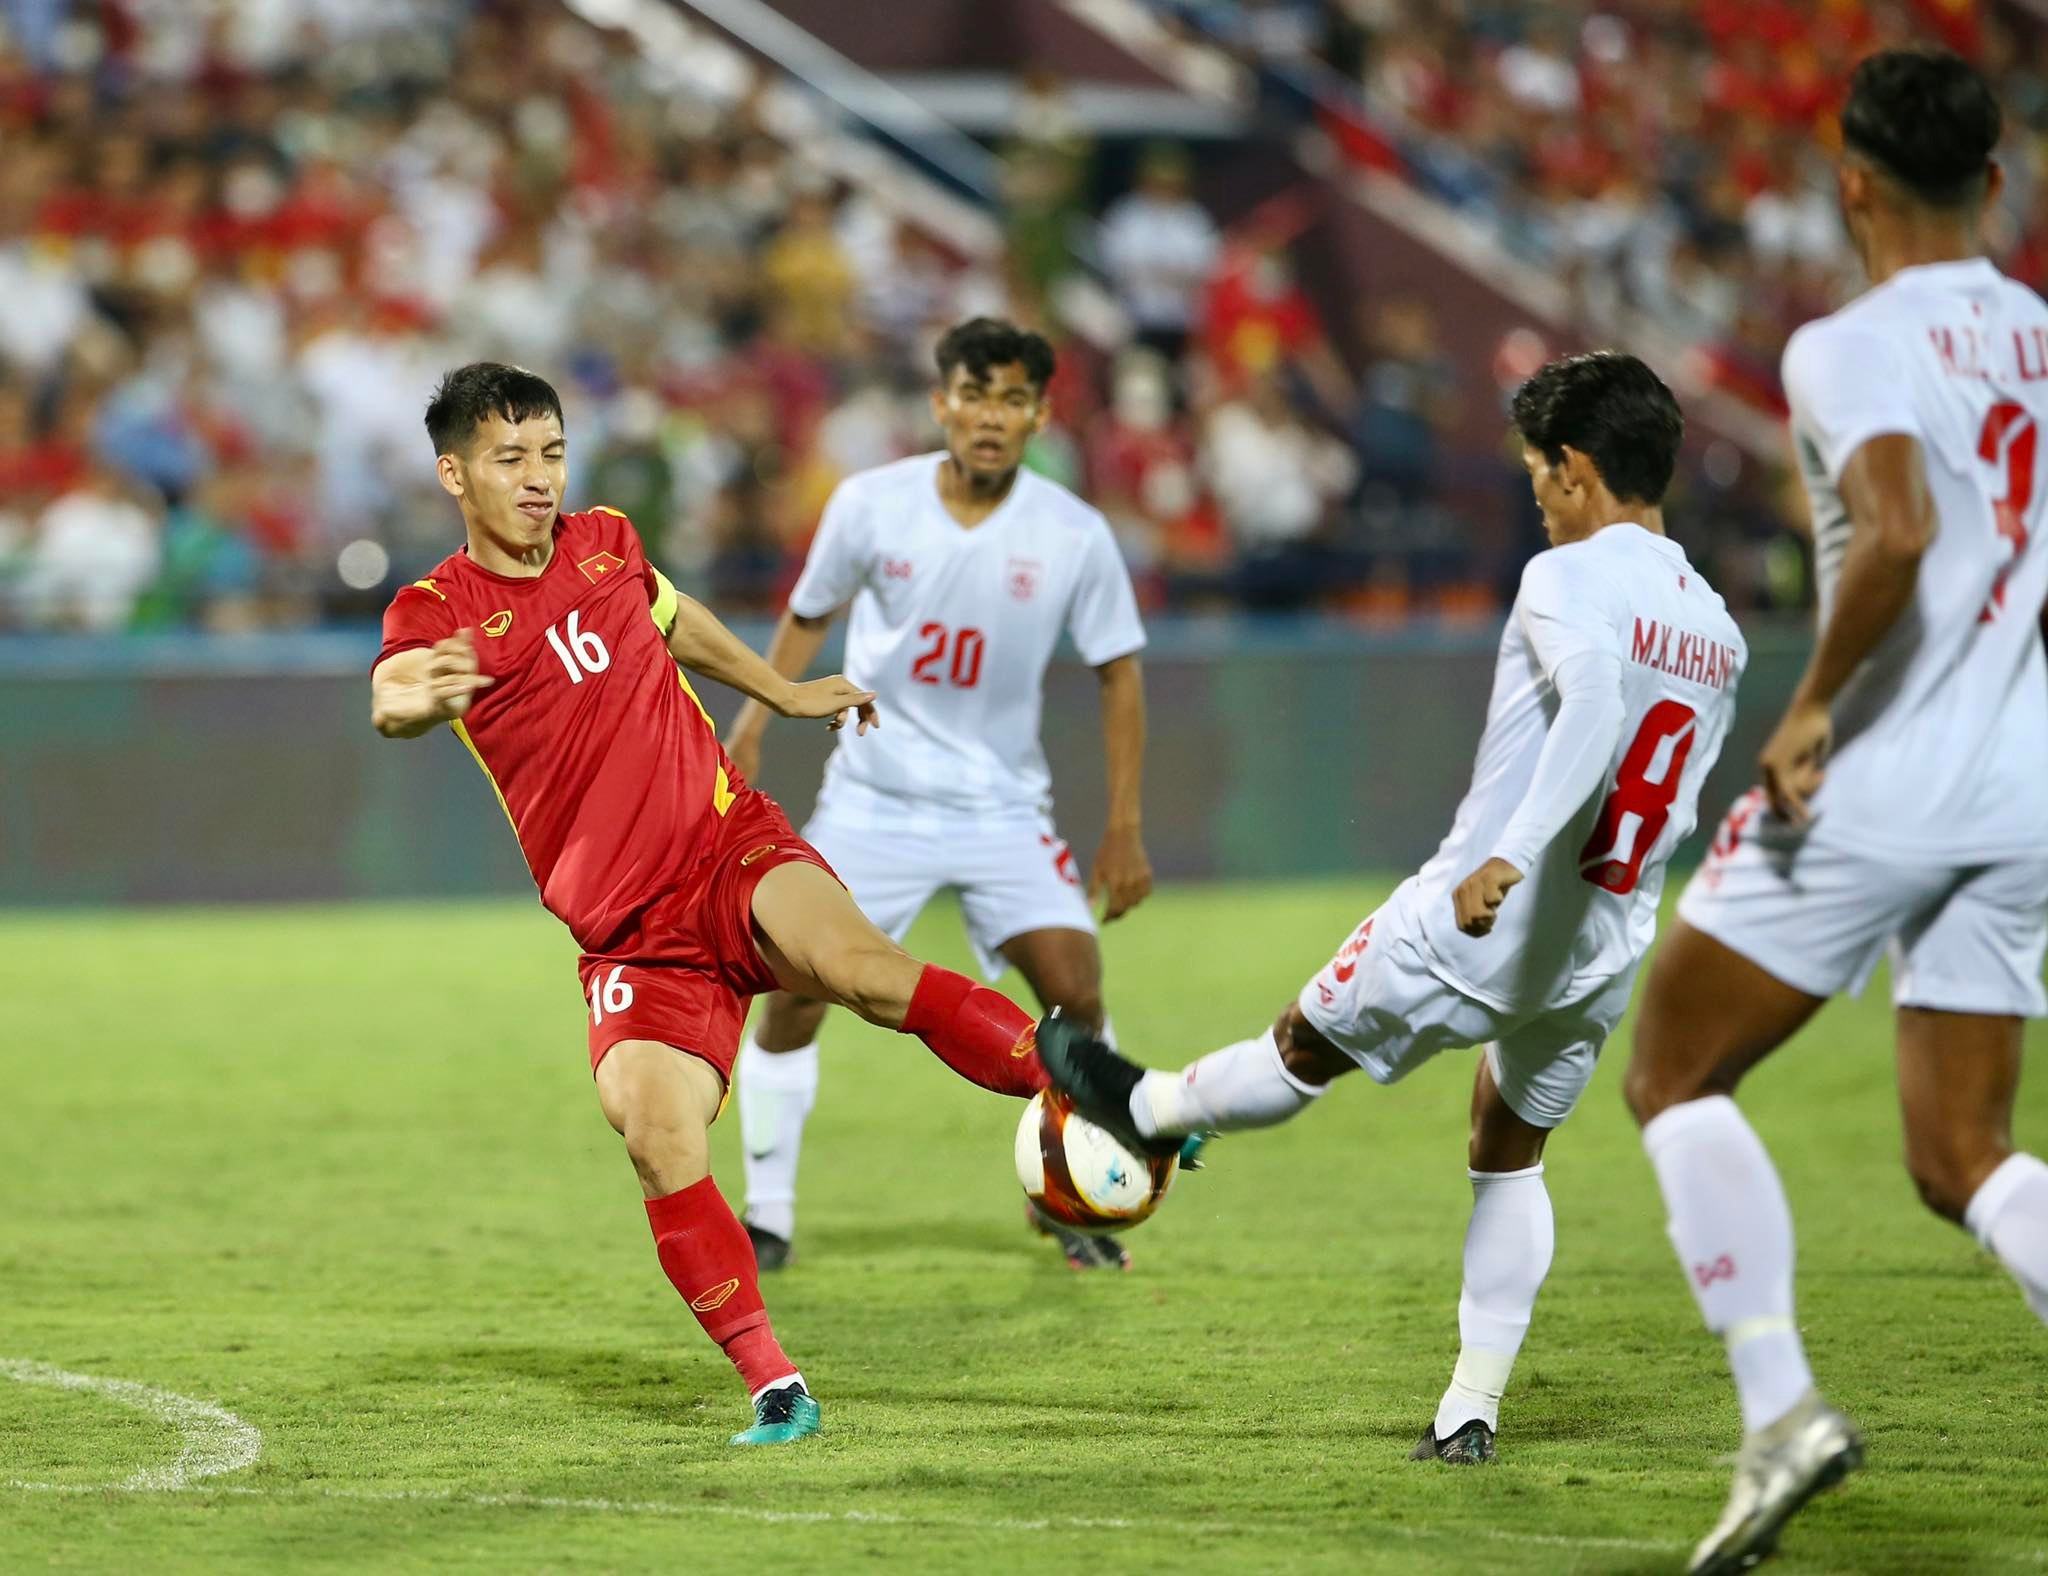 Vietnamese (red jersey) and Myanmarese players vie for a ball during their Group A game in men's football at the 31st Southeast Asian (SEA) Games at Viet Tri Stadium in Phu Tho Province, Vietnam, May 13, 2022. Photo: Nguyen Khoi / Tuoi Tre